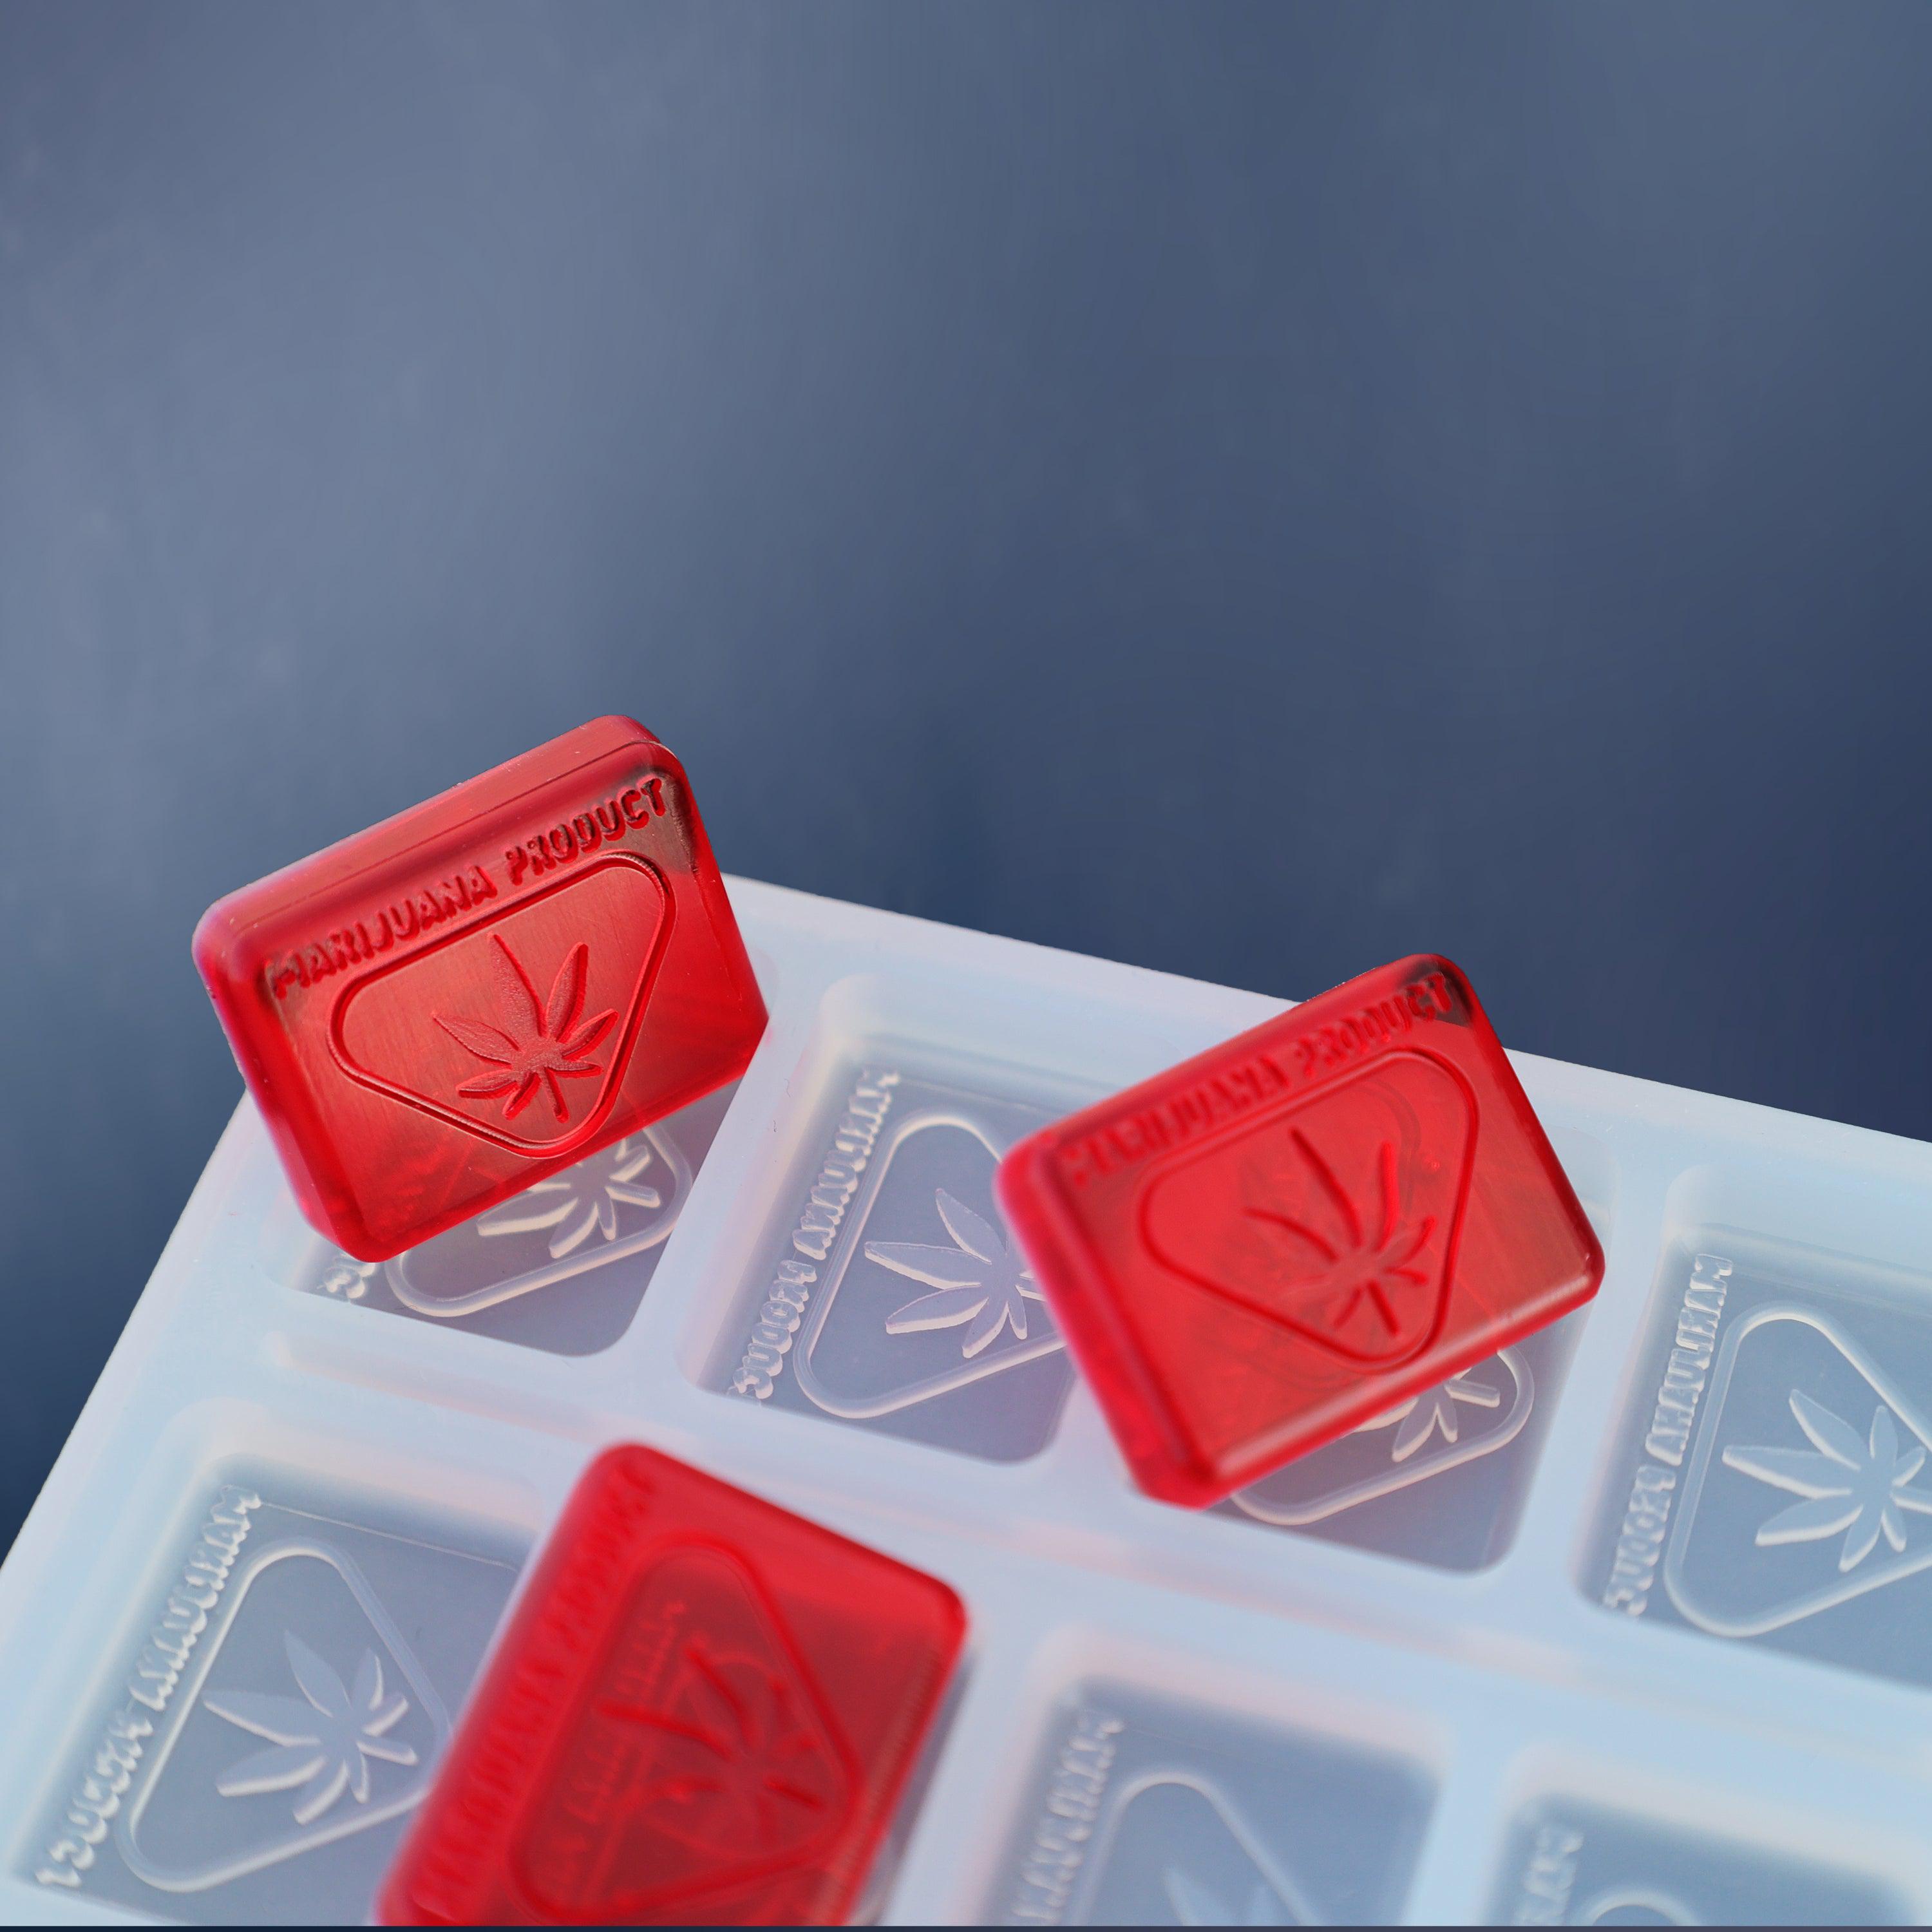 Regulation State Silicone Gummy Molds